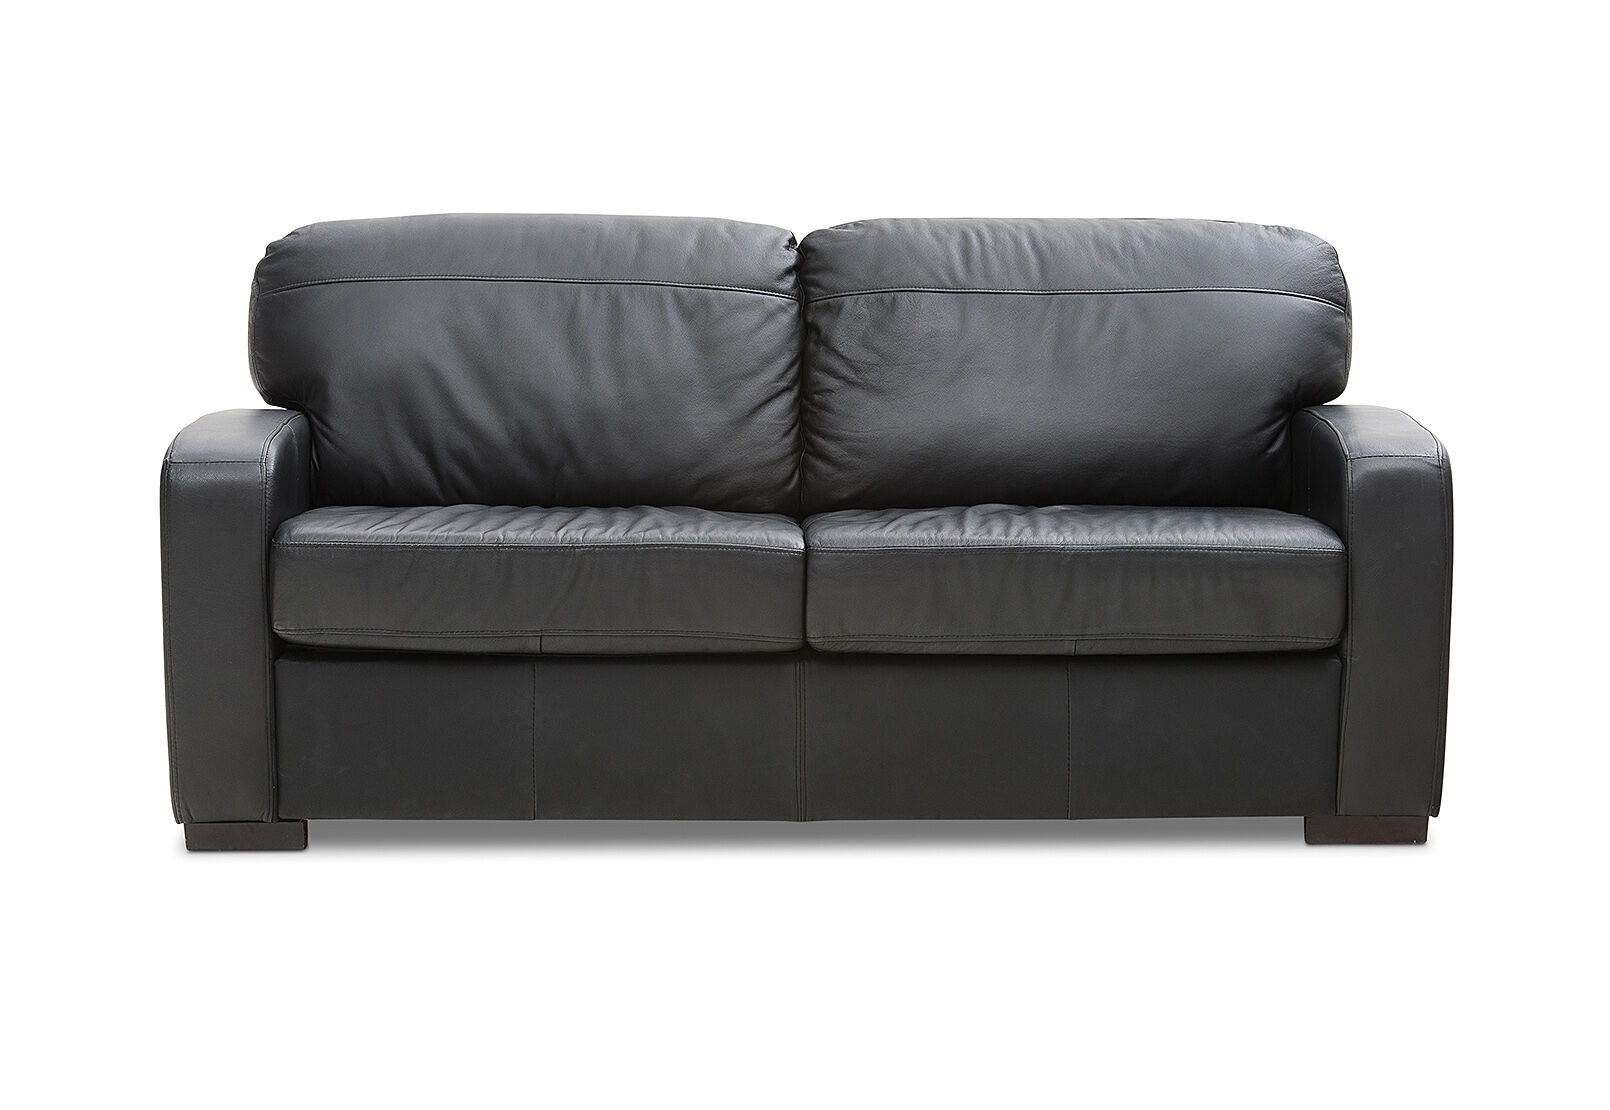 Black Future Leather 2 Seater Sofa Bed, 2 Person Sofa Bed Couch